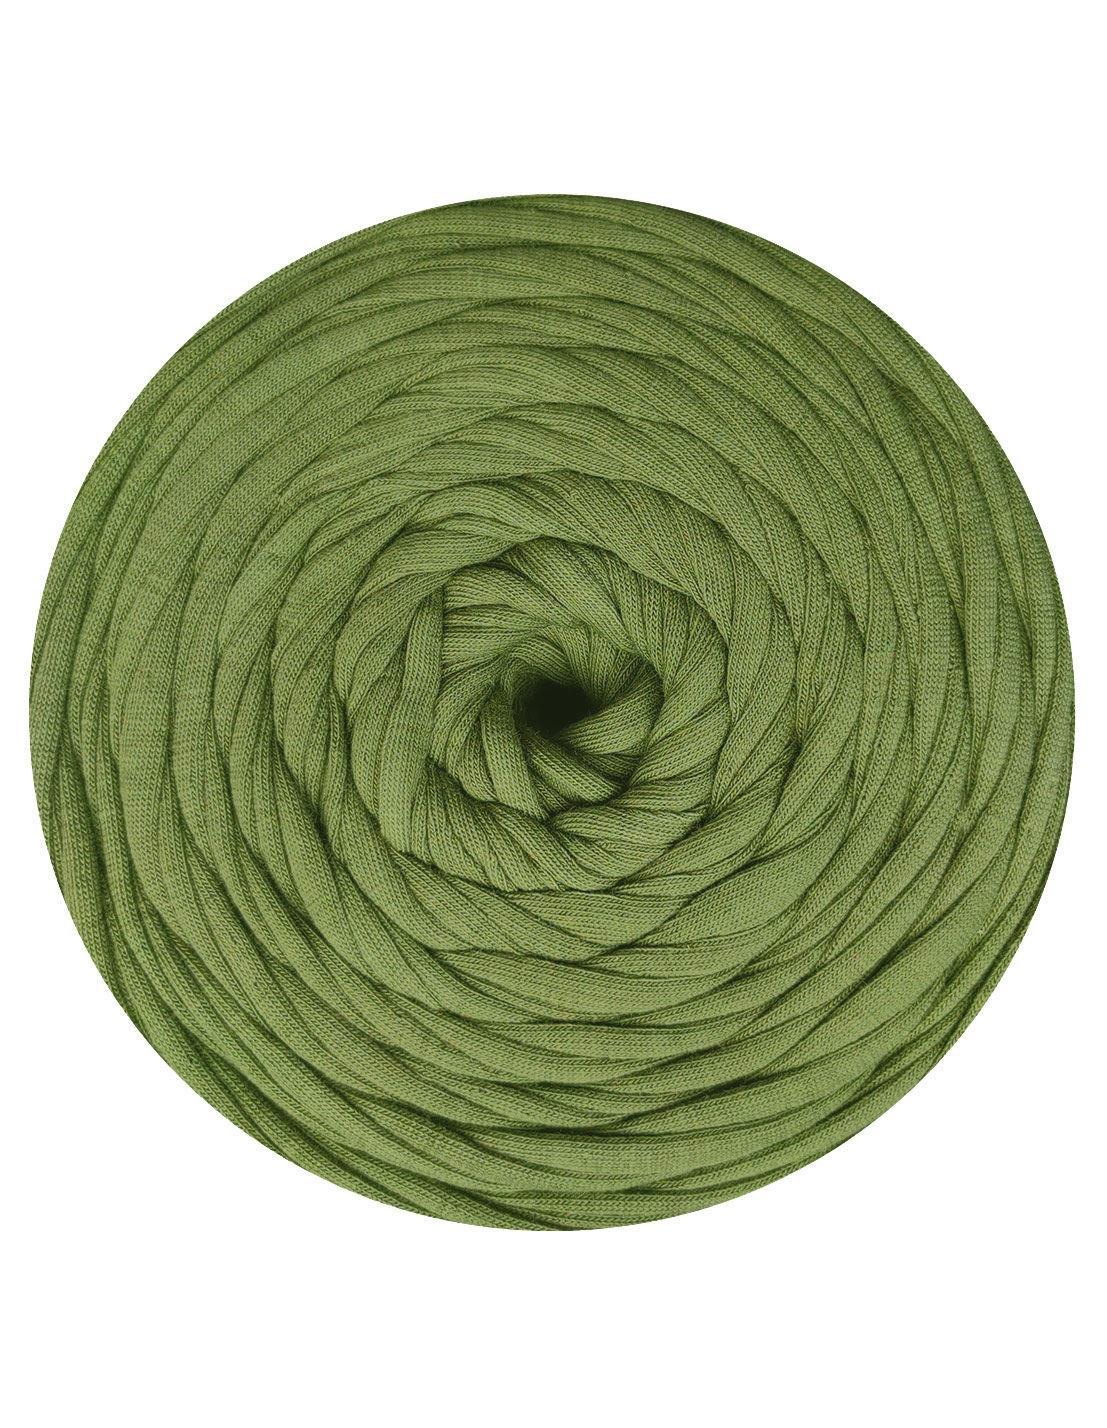 Pickle green t-shirt yarn by Hoooked Zpagetti (100-120m)